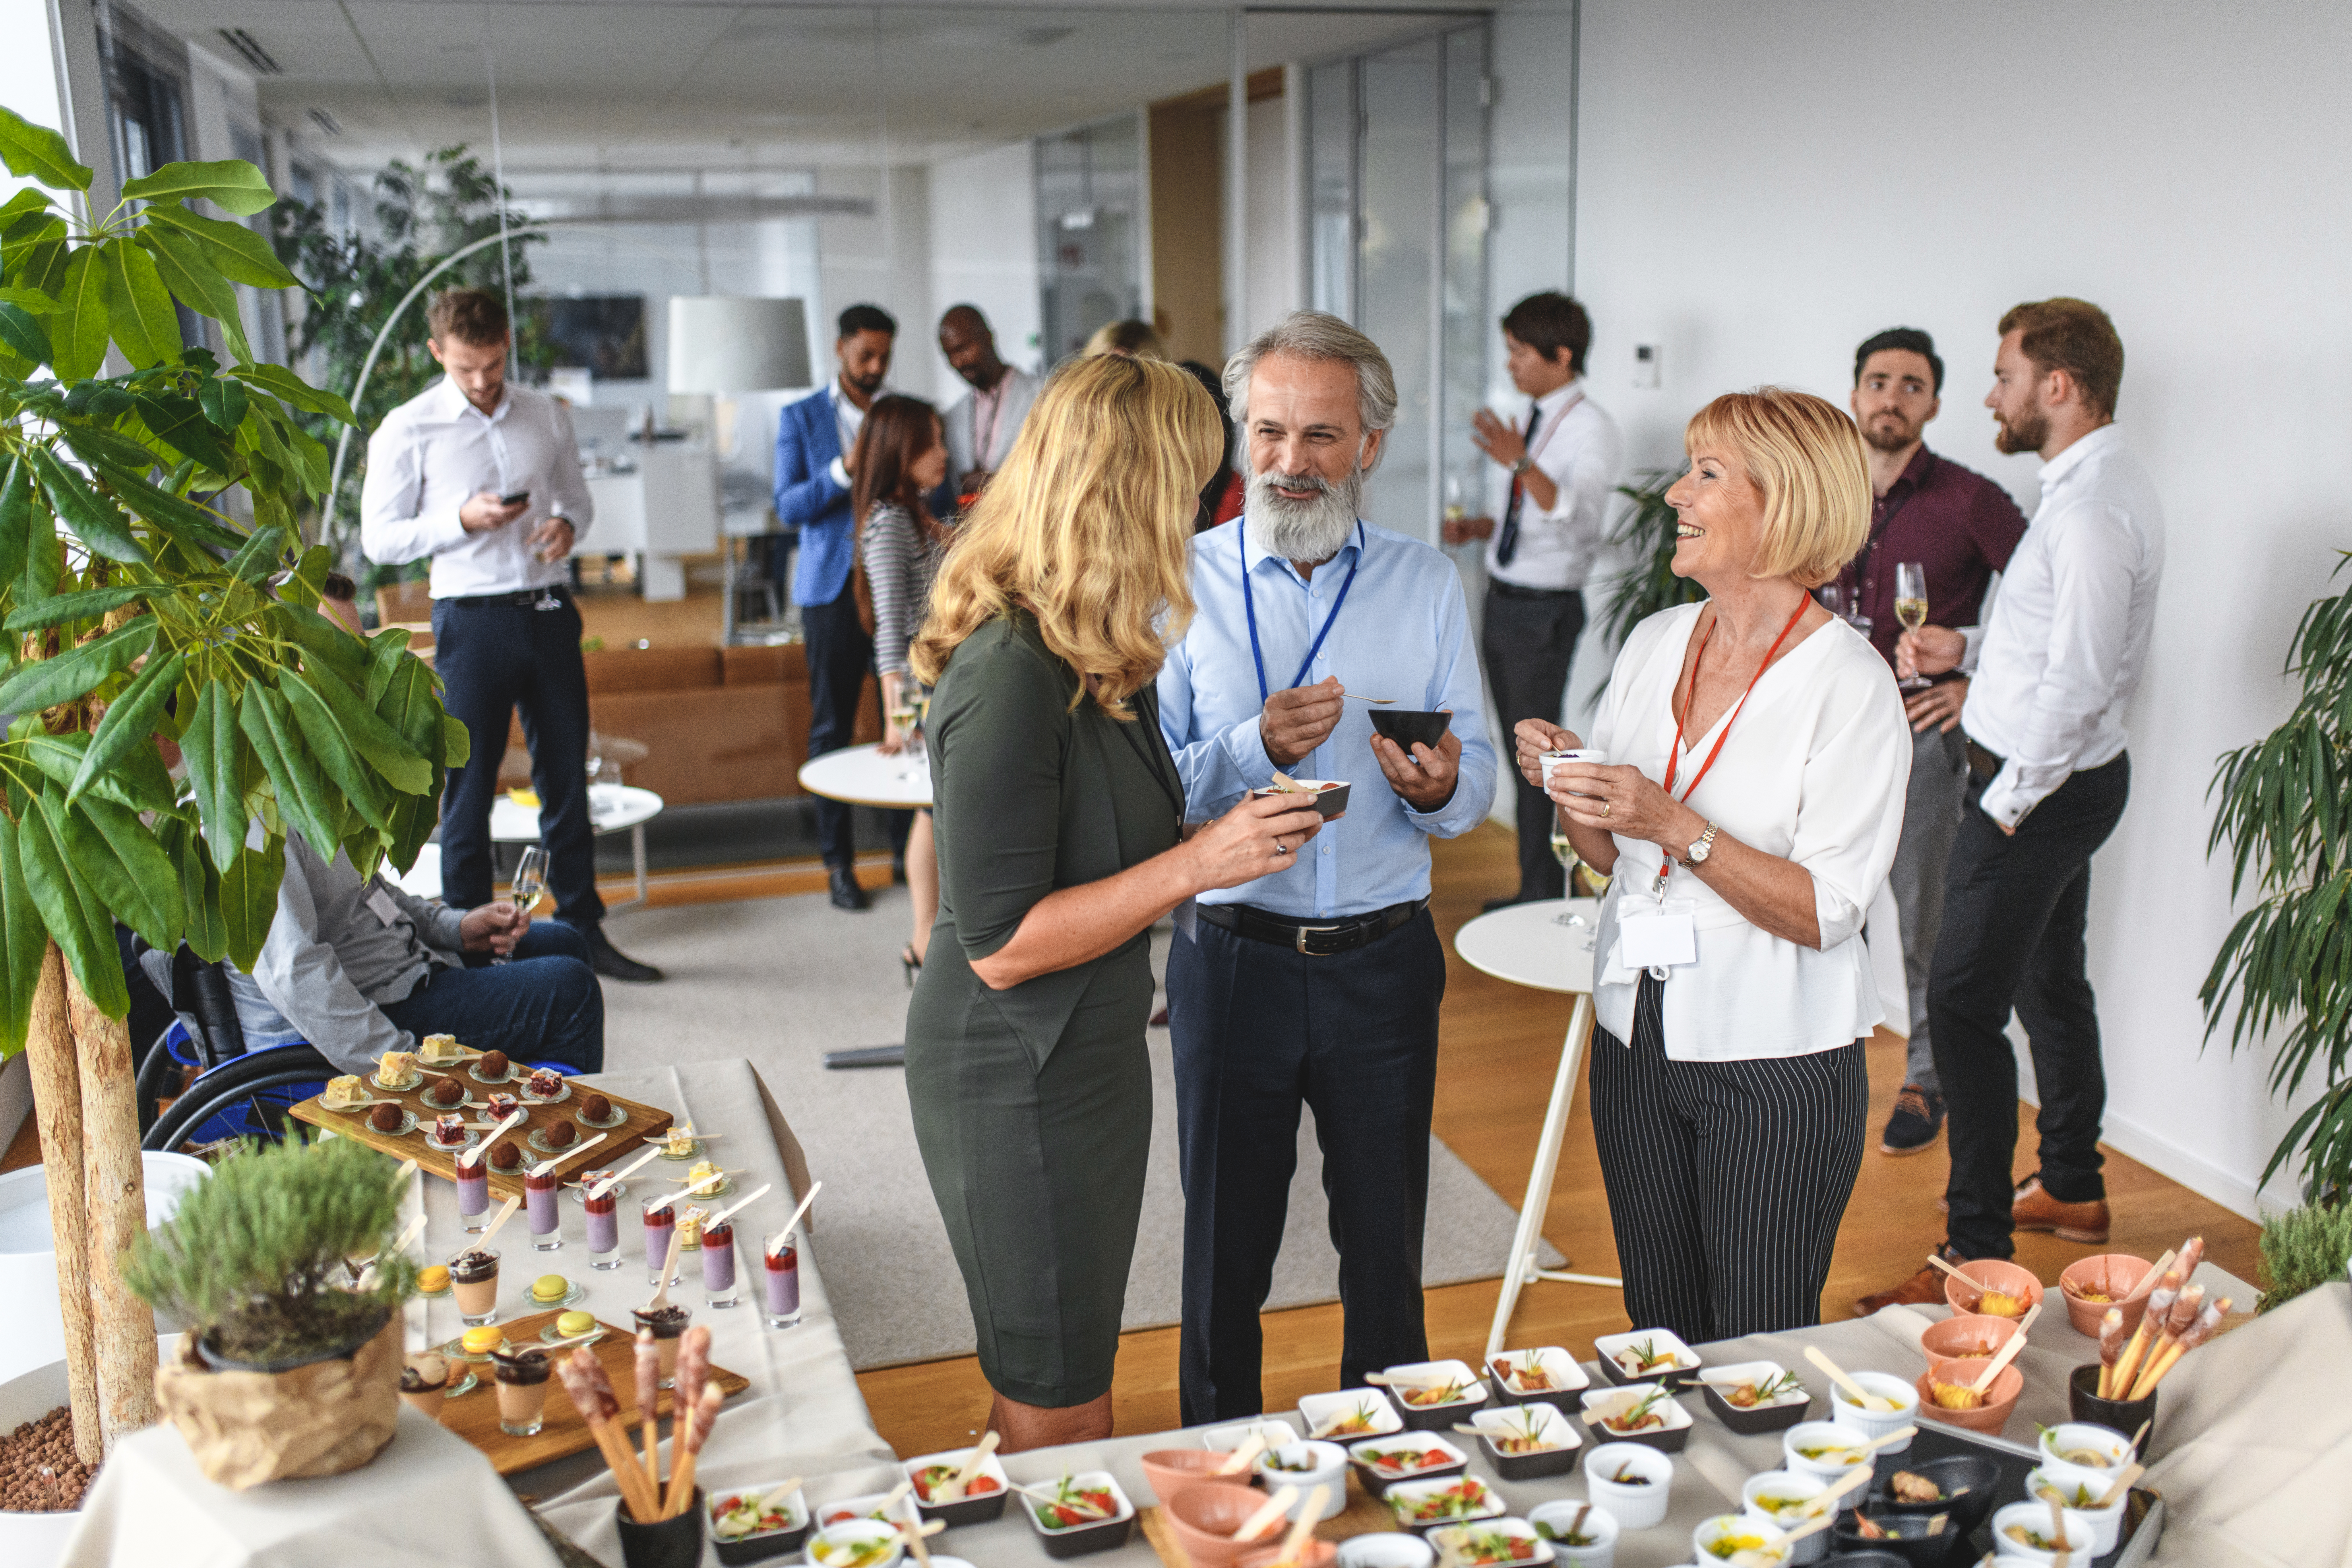 Elevated viewpoint of relaxed corporate colleagues enjoying savory dishes from buffet table at party to celebrate launch of new business.